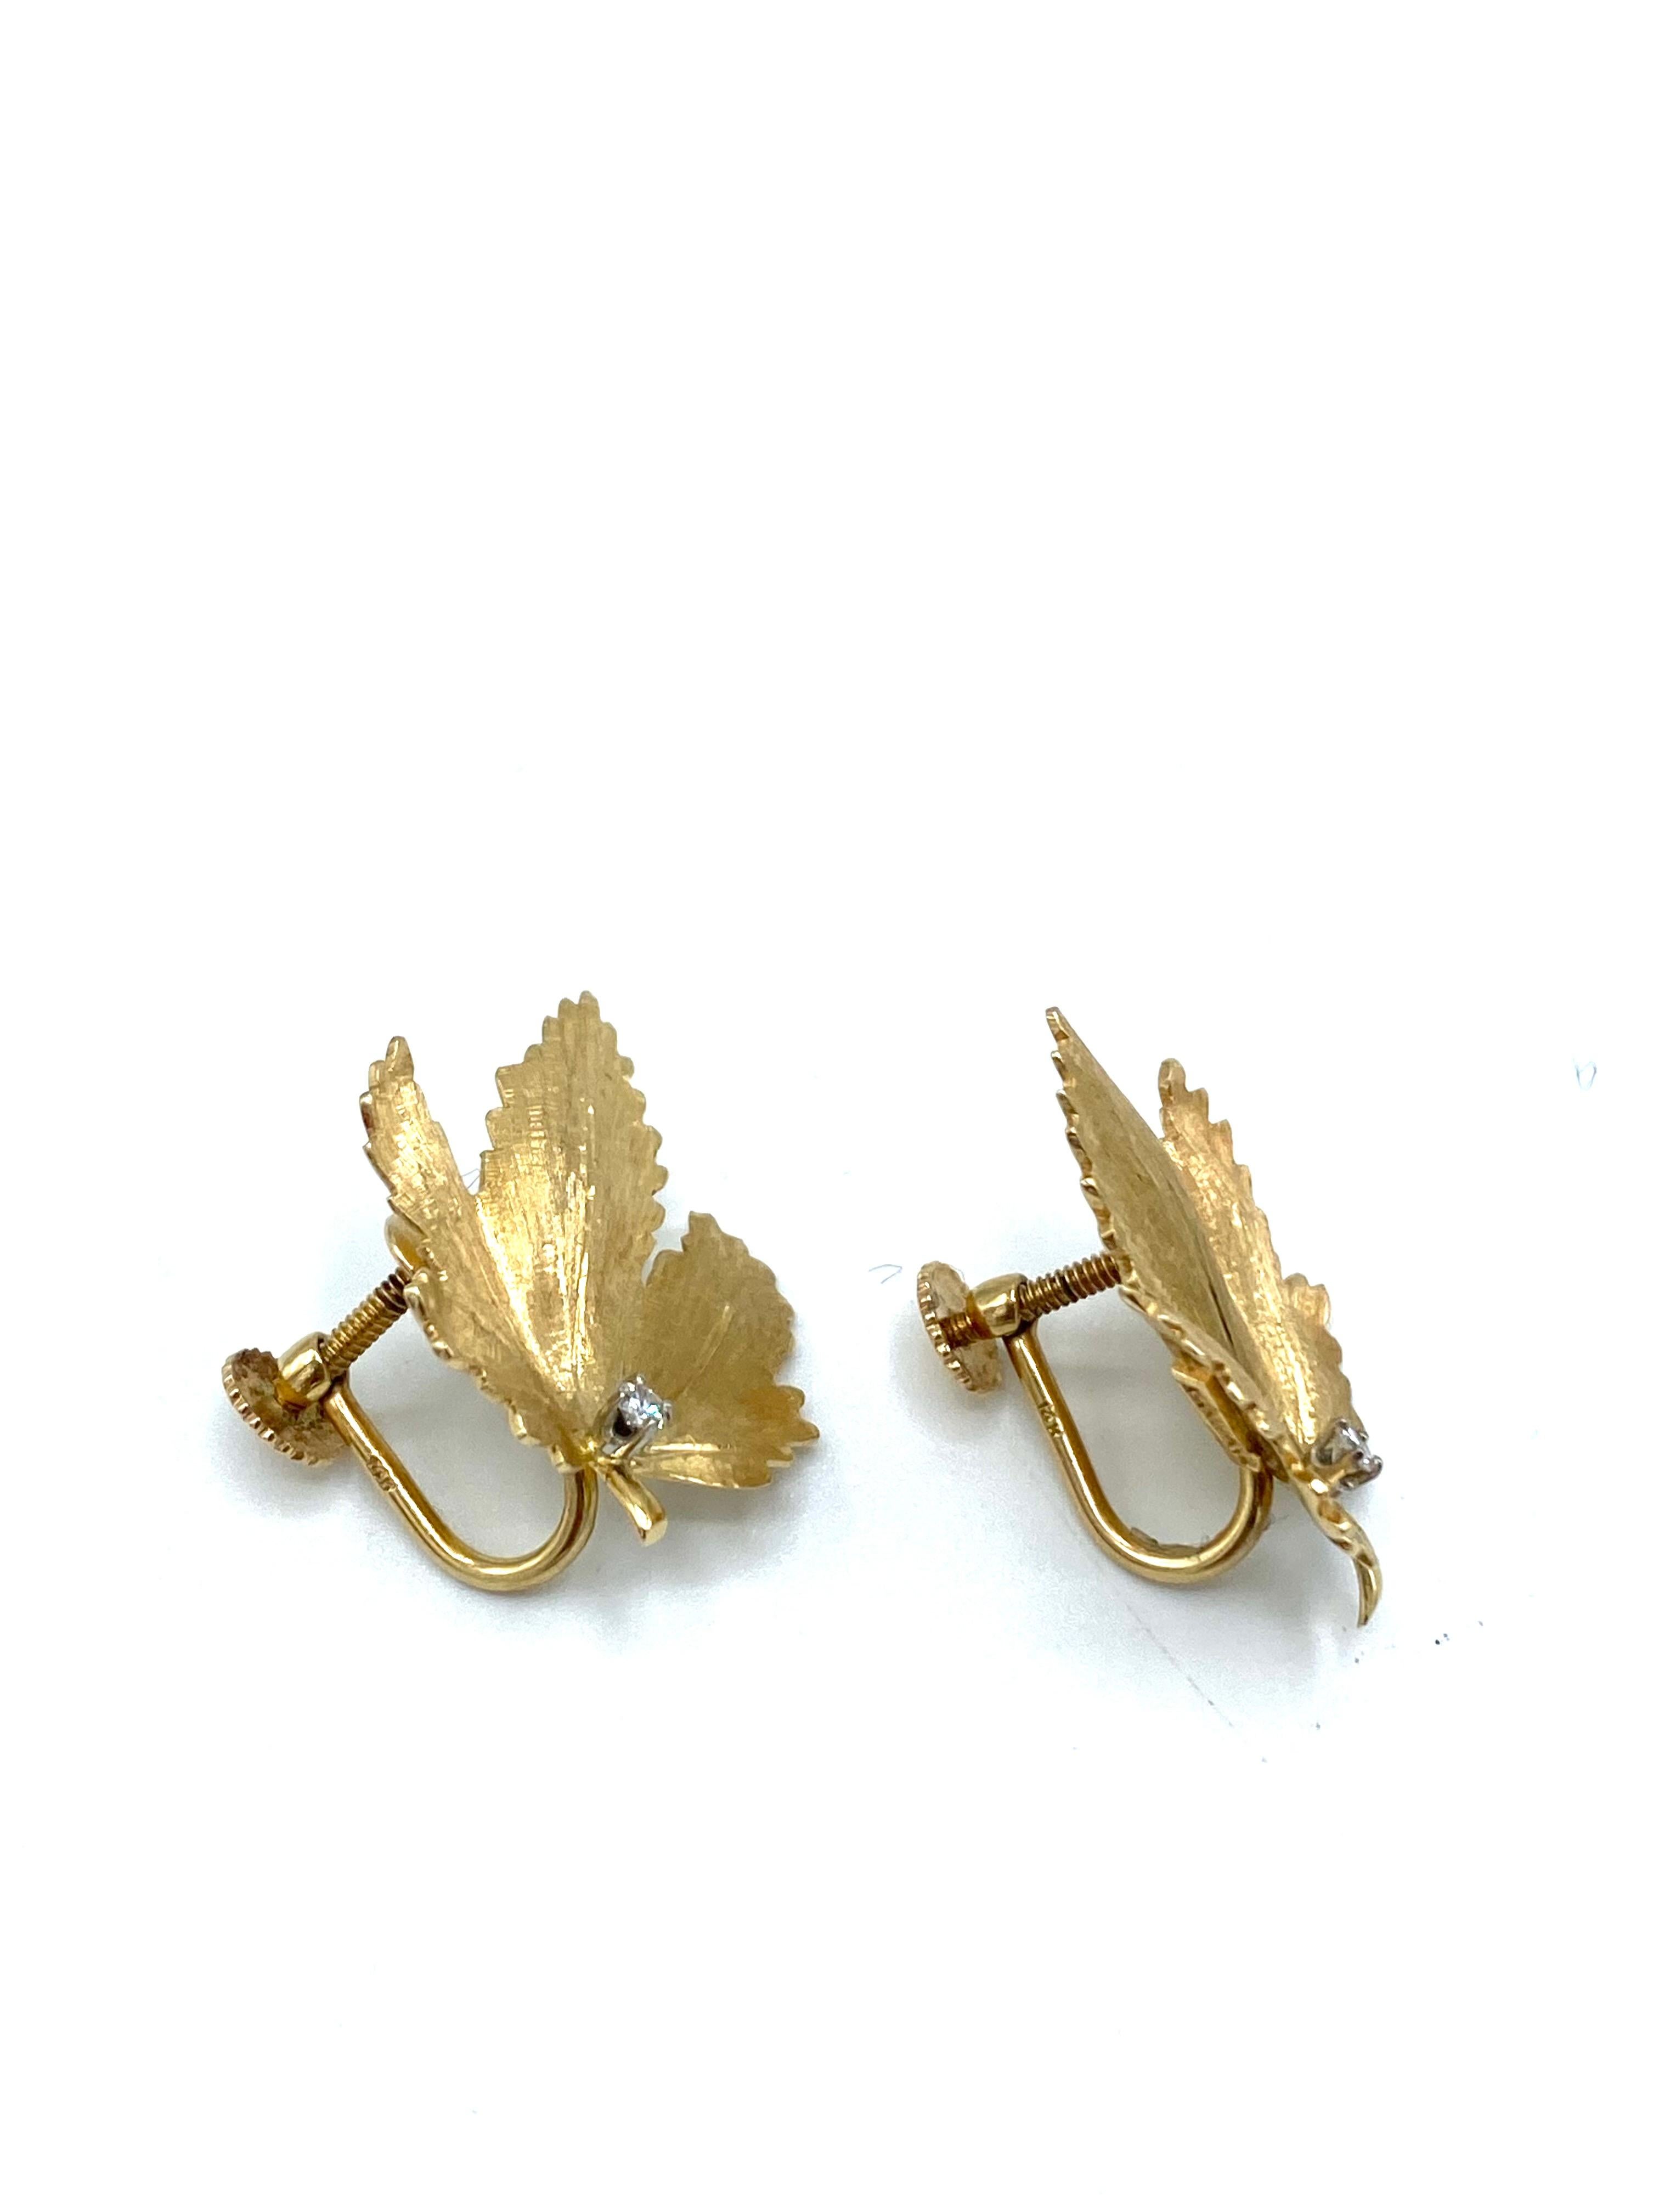 Product details:

The ear earrings are designed by Cartier in New York. They feature 14 karat yellow textured gold with 0.06 cts old European cut diamonds, the earrings shaped as maple leaf and feature screw in closure.
The earrings are signed by